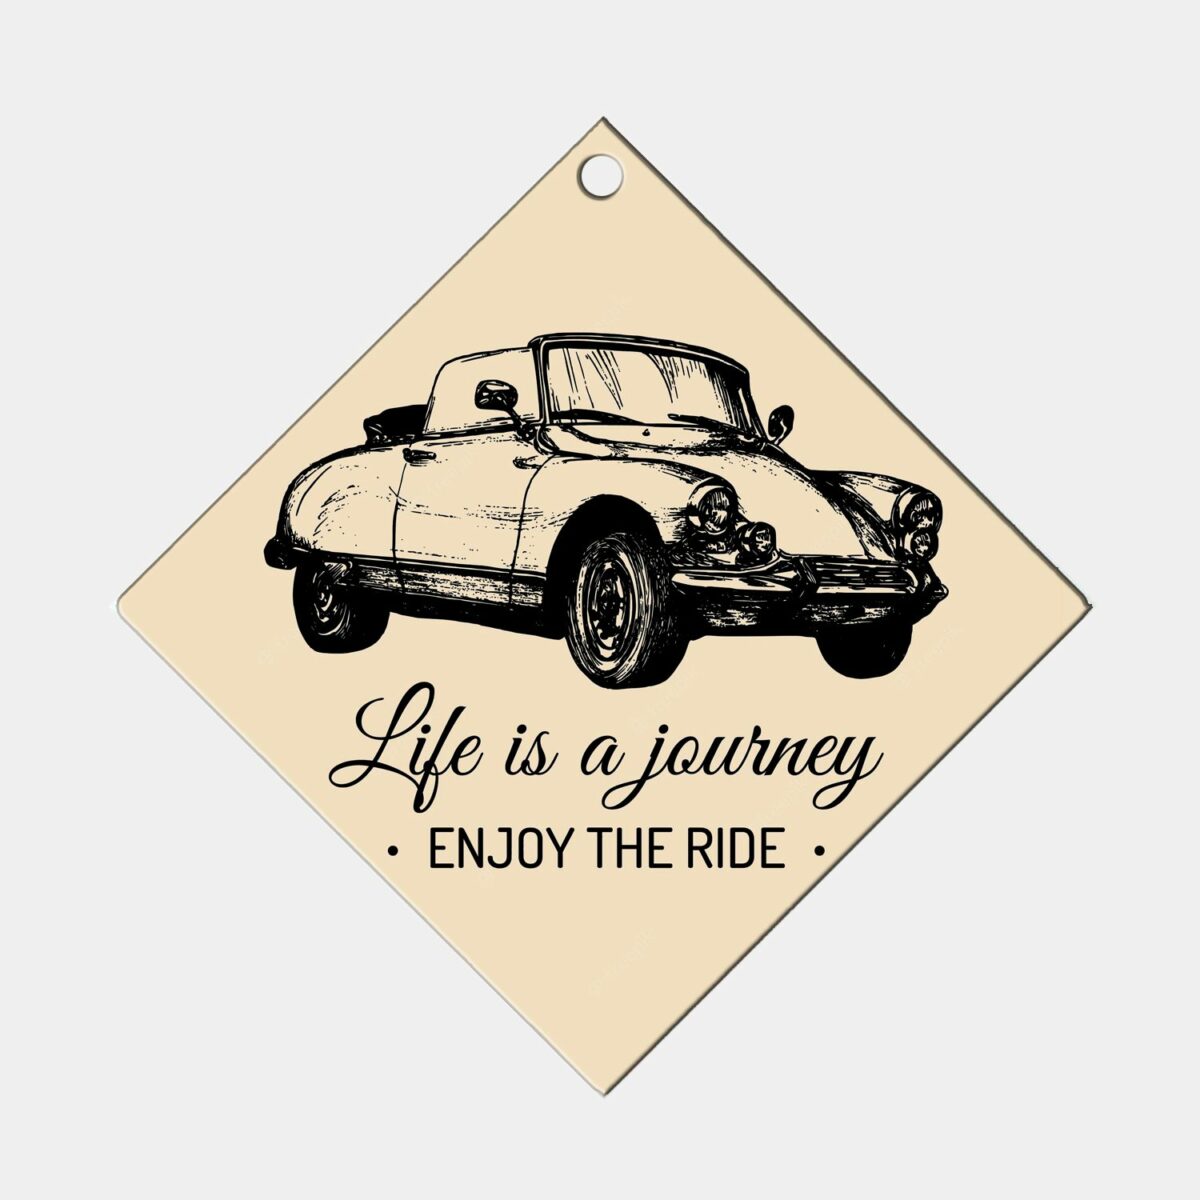 Life is Journey Enjoy the Ride 01